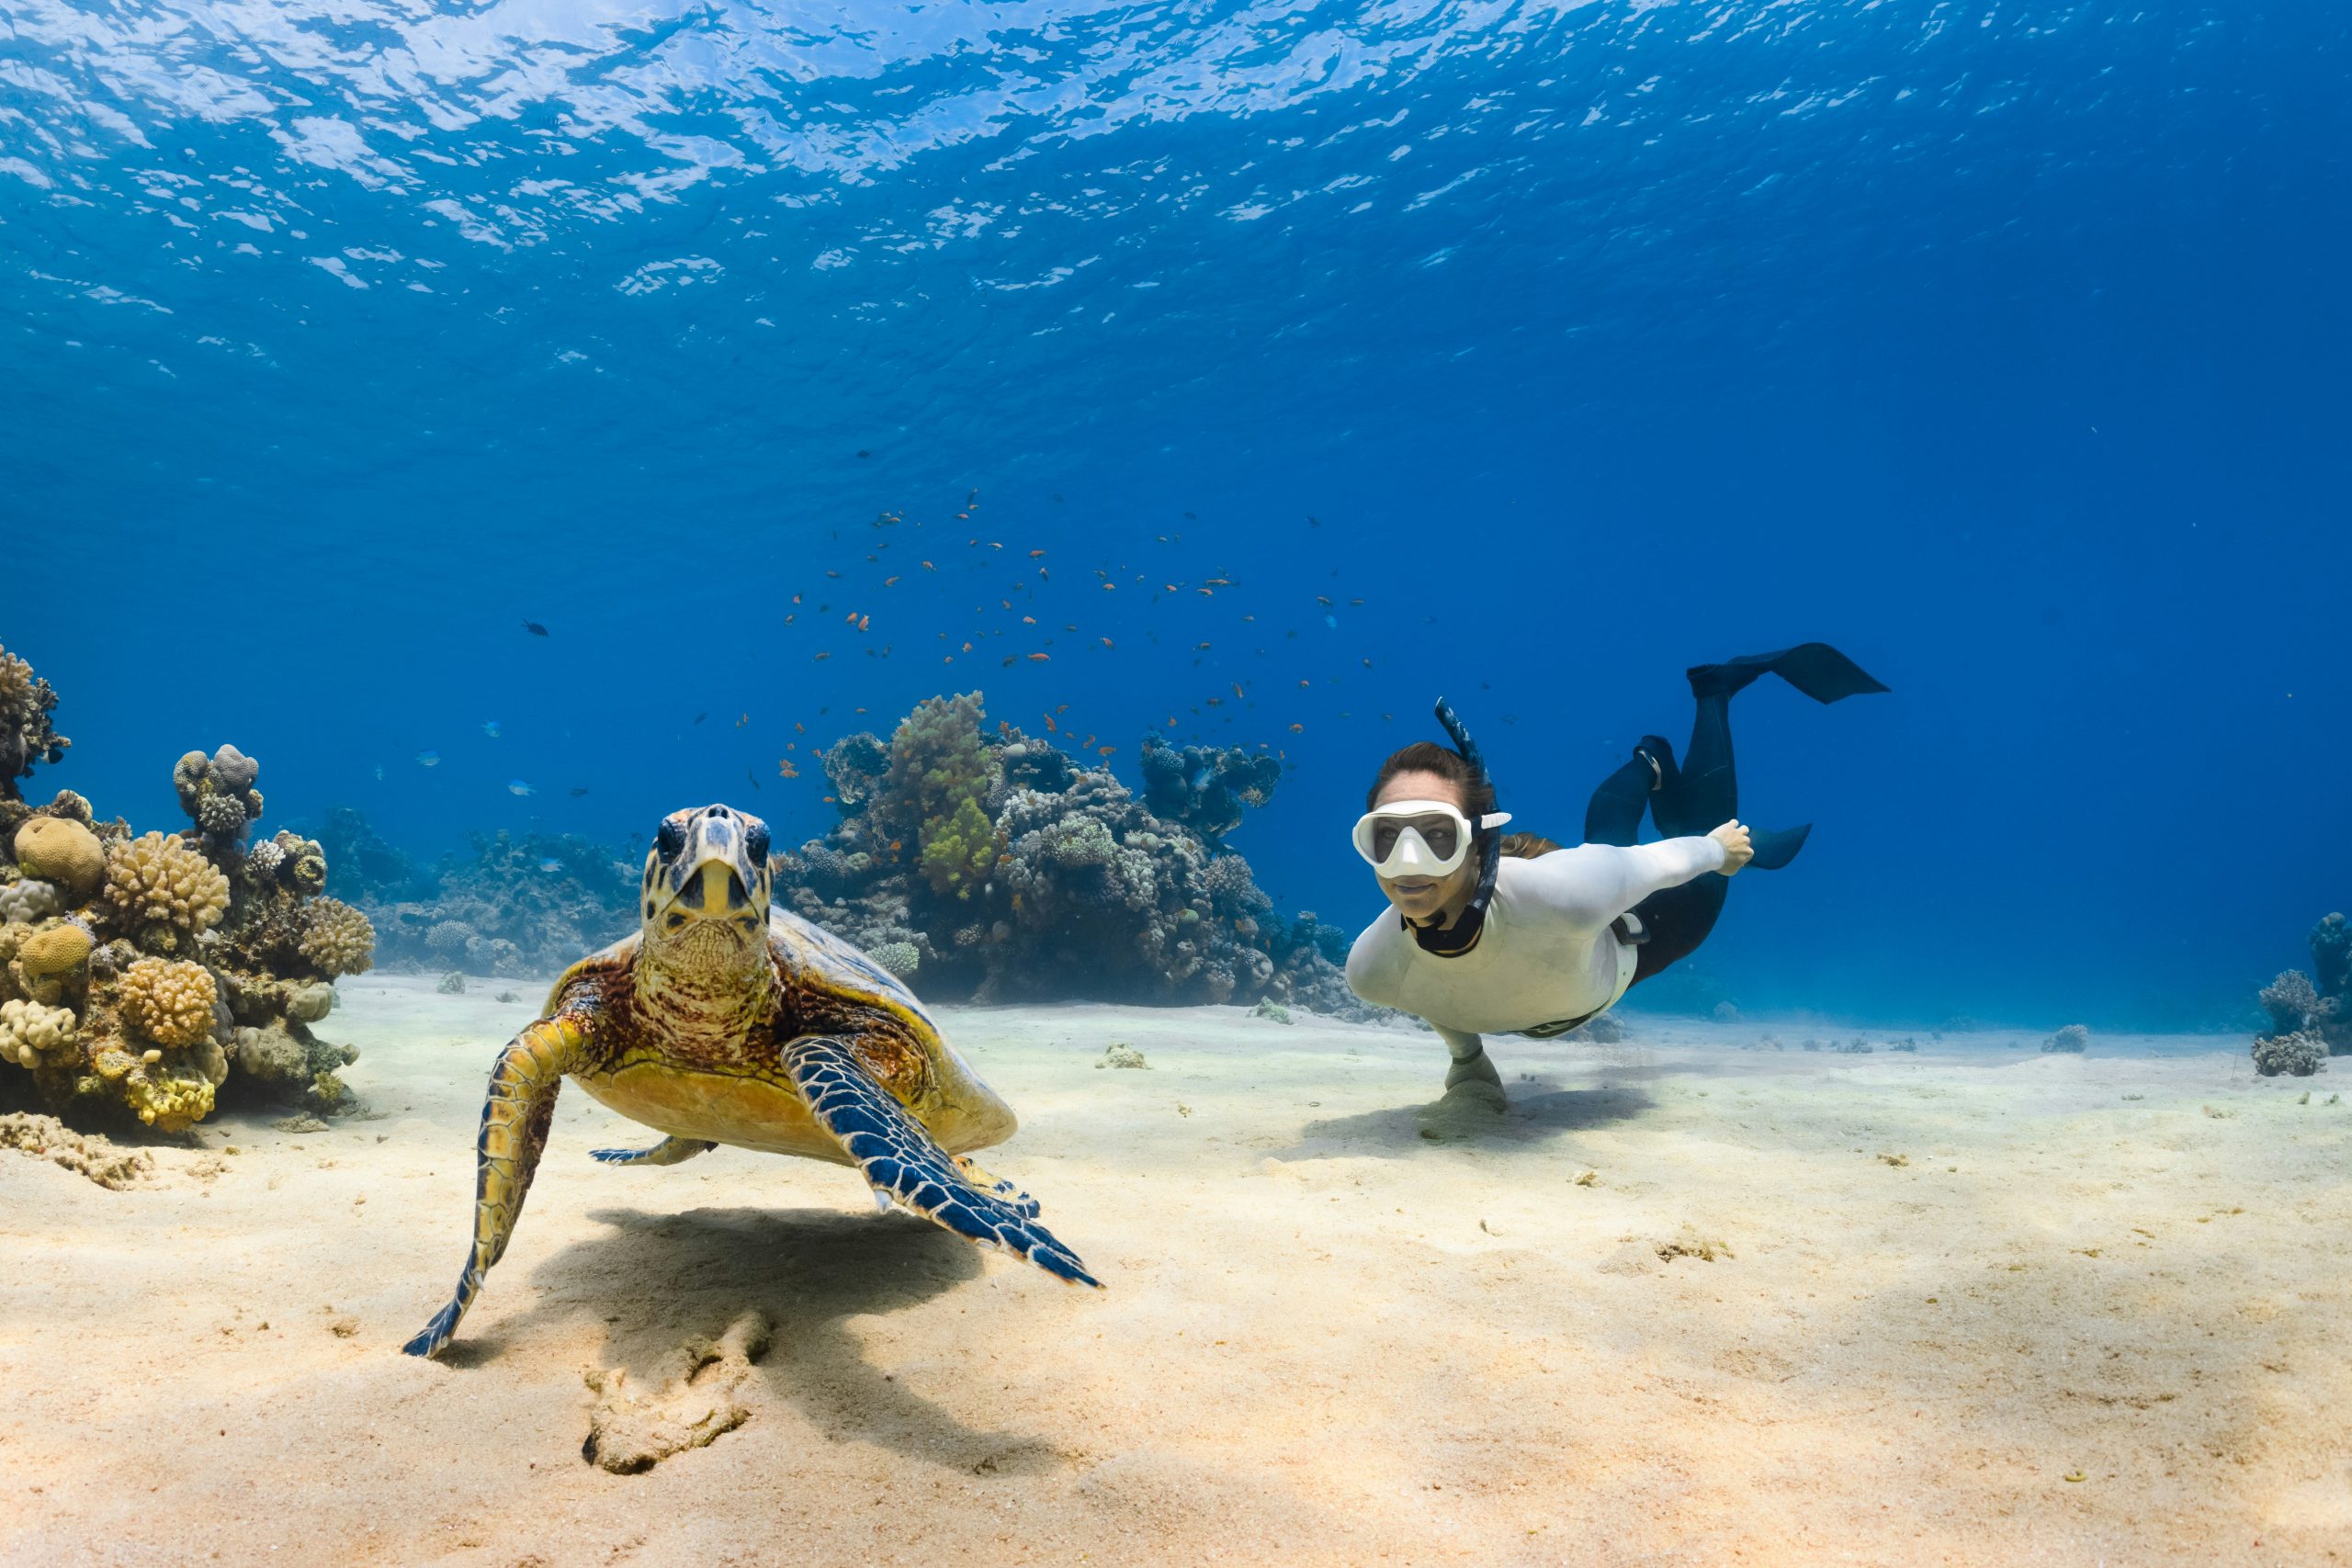 explore the underwater world with thrilling scuba diving adventures. discover vibrant marine life and stunning coral reefs on your next scuba diving expedition.